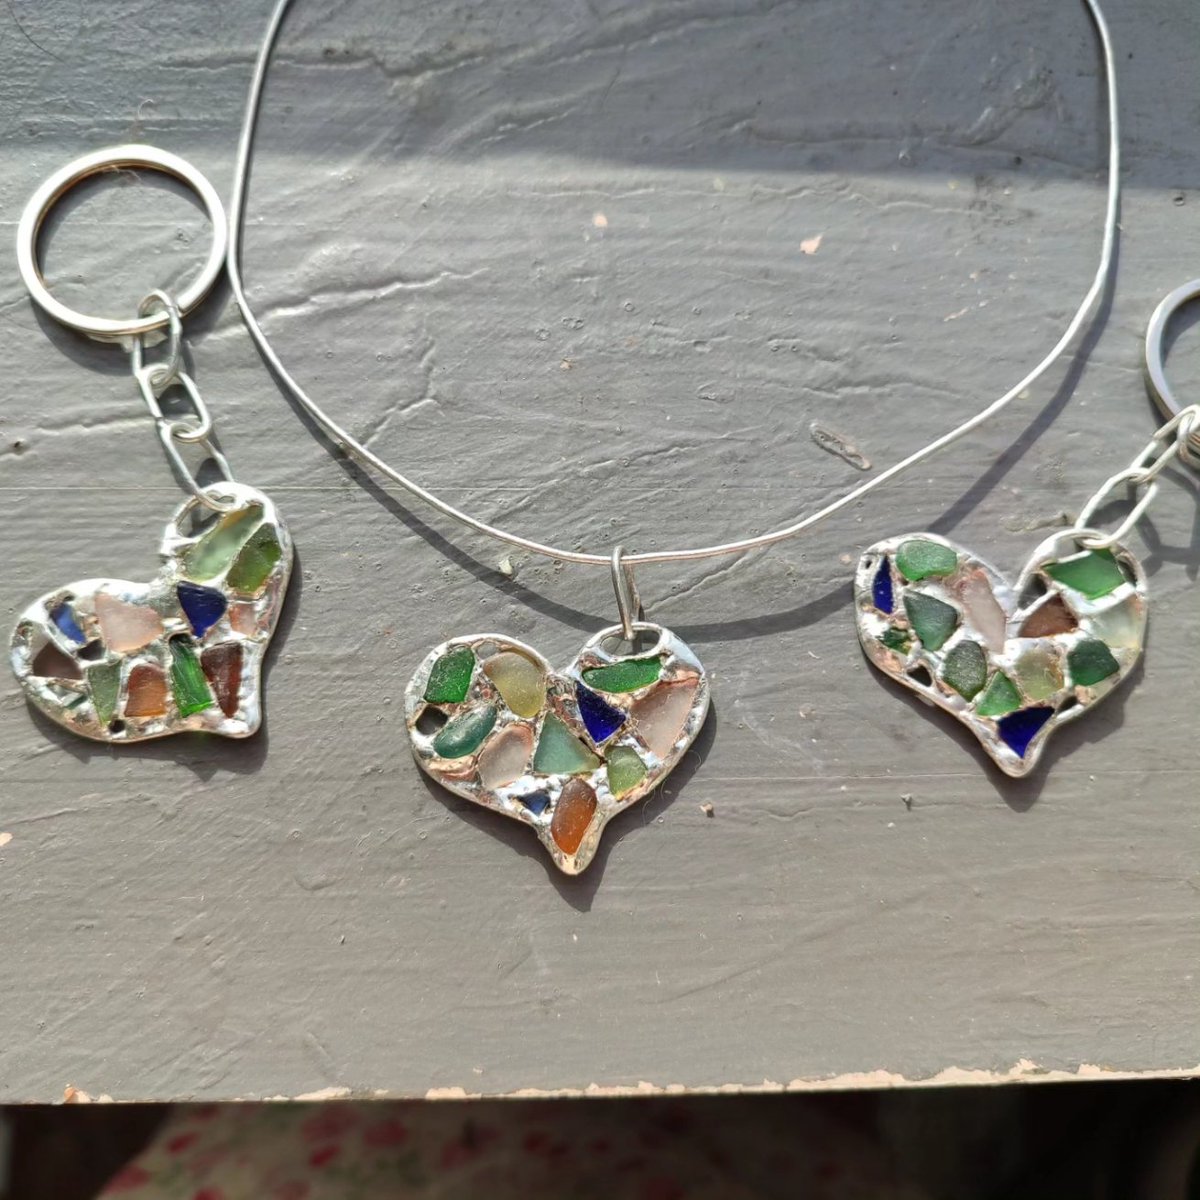 Now available as necklace too 💖 #SeaStainedGlass #stainedglass #glassart #stainedglassart #handmade #seaglassart #art #seaglassjewelry #seaglass #trashtotreasure #recycledart #trashart #seaglassaddict #recycle #upcycled #heart